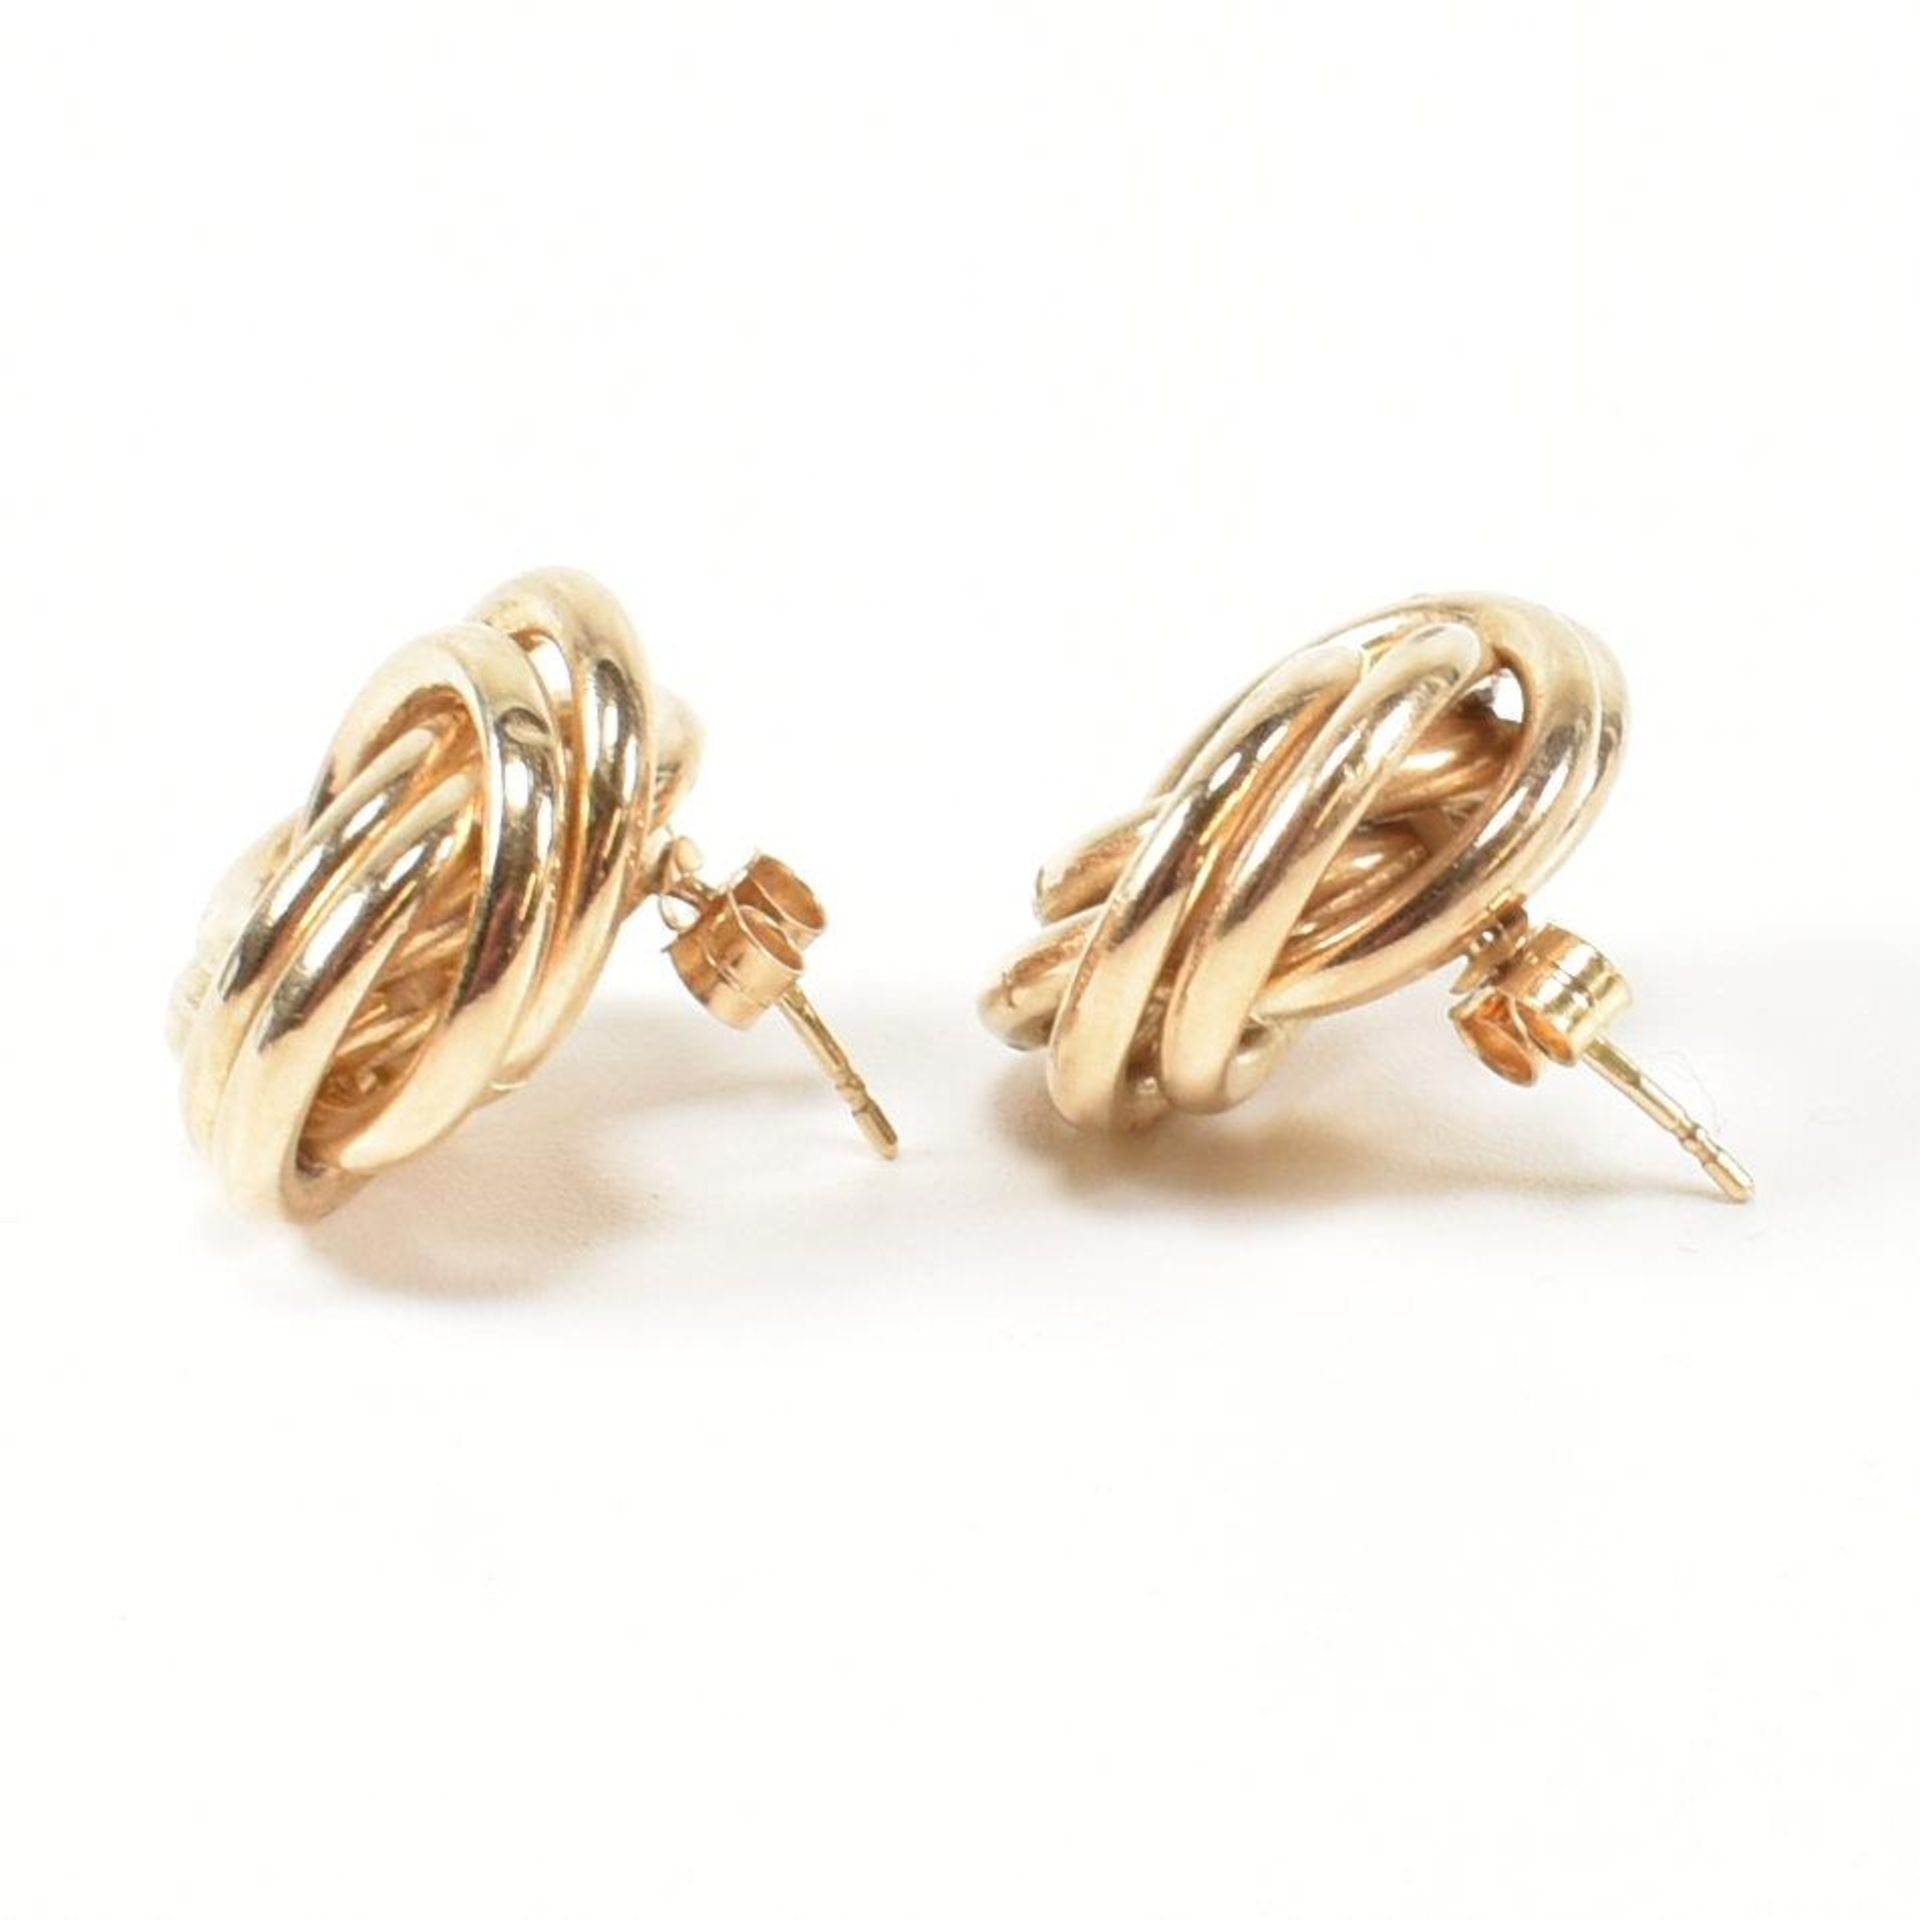 PAIR OF HALLMARKED 9CT GOLD KNOT STUD EARRINGS - Image 2 of 6